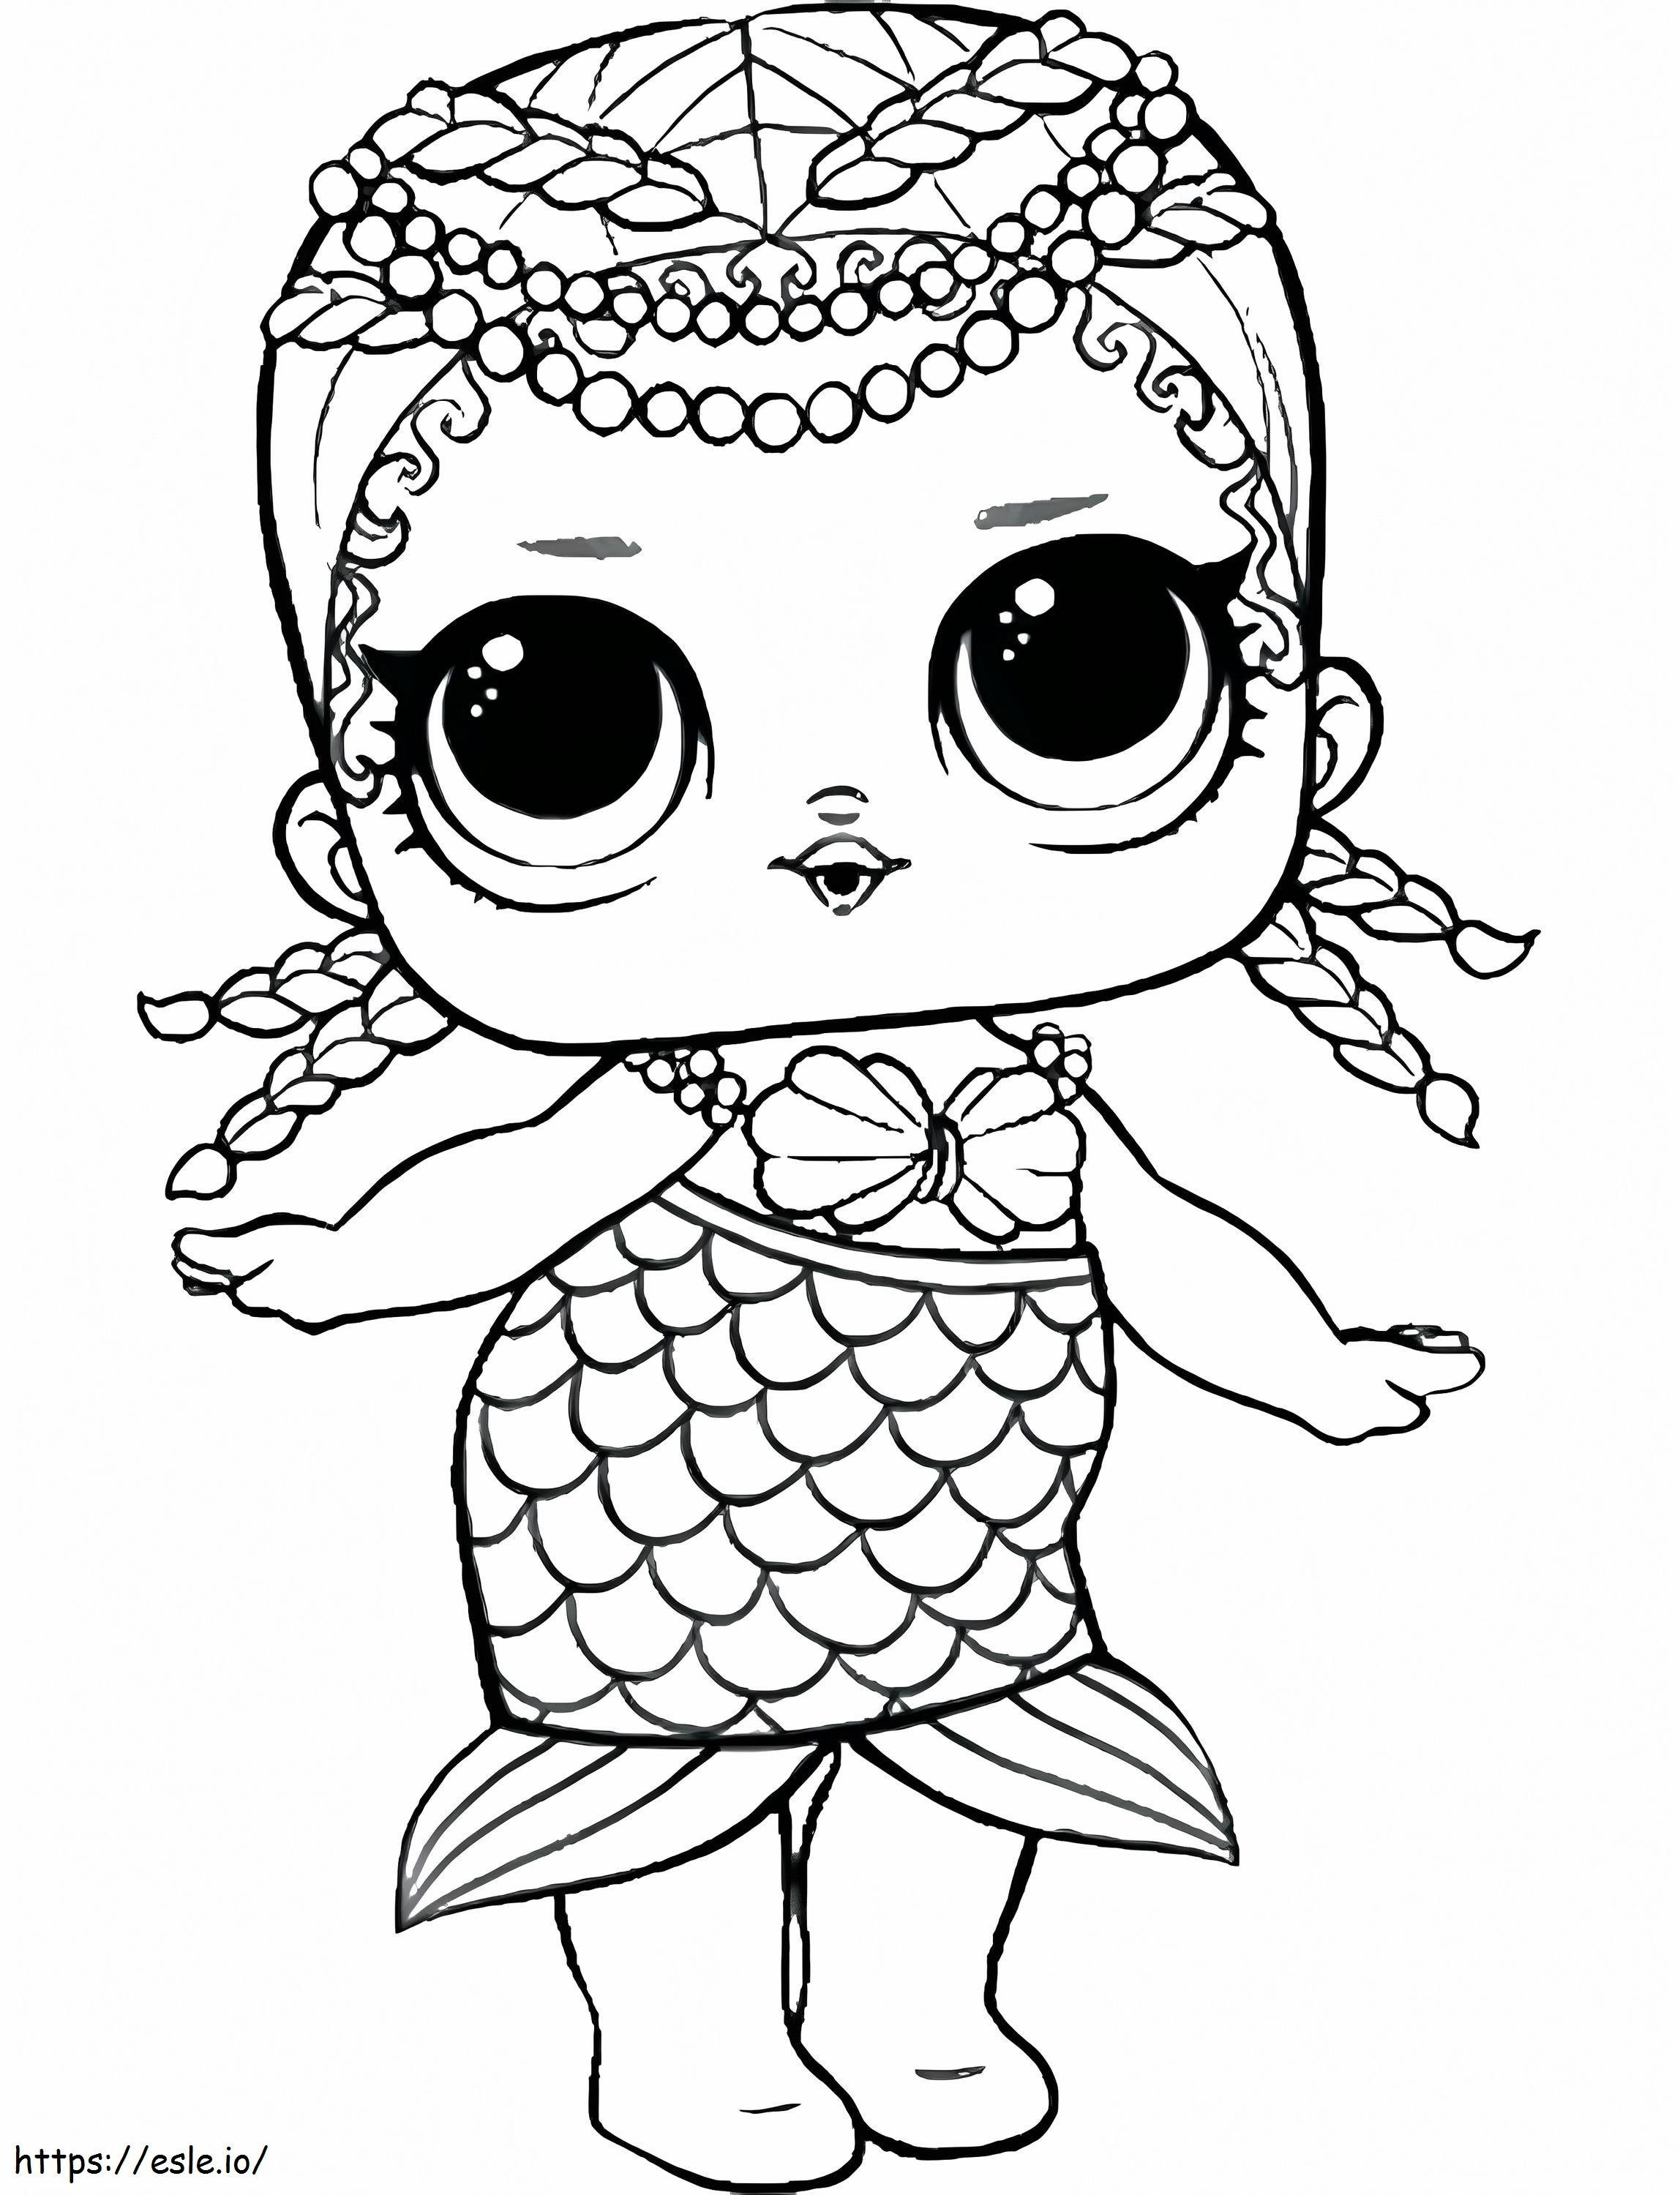 1572224054 Doll Doll Ballerina Paper Doll coloring page